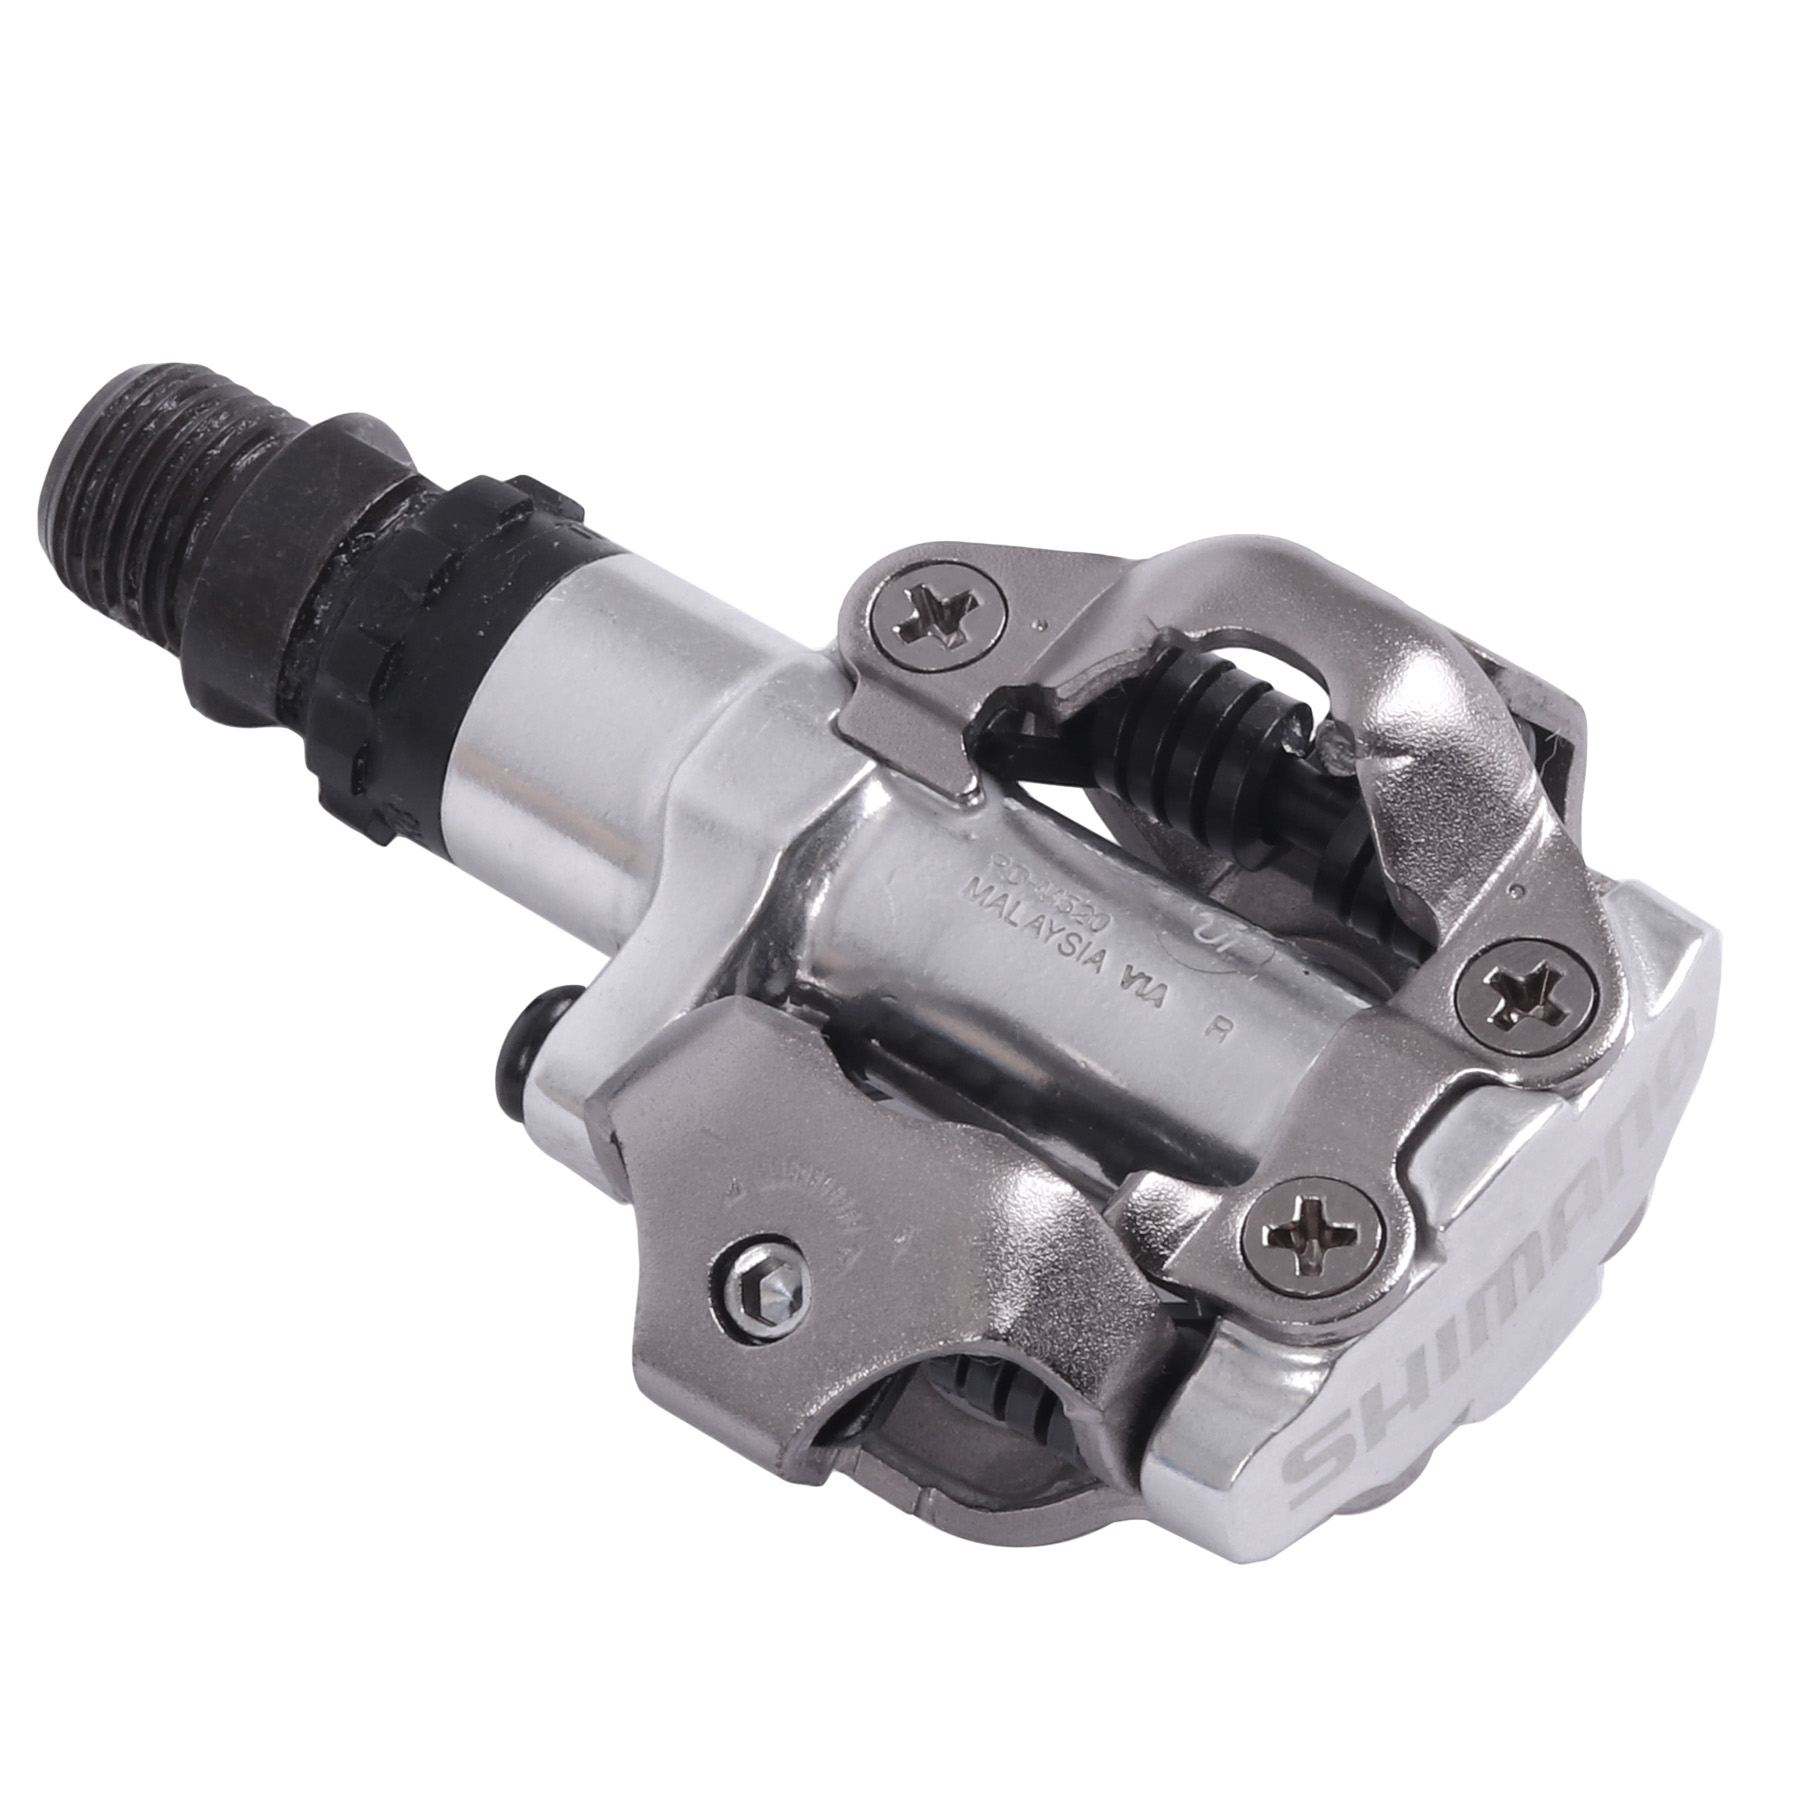 Picture of Shimano PD-M520 SPD Pedal - silver